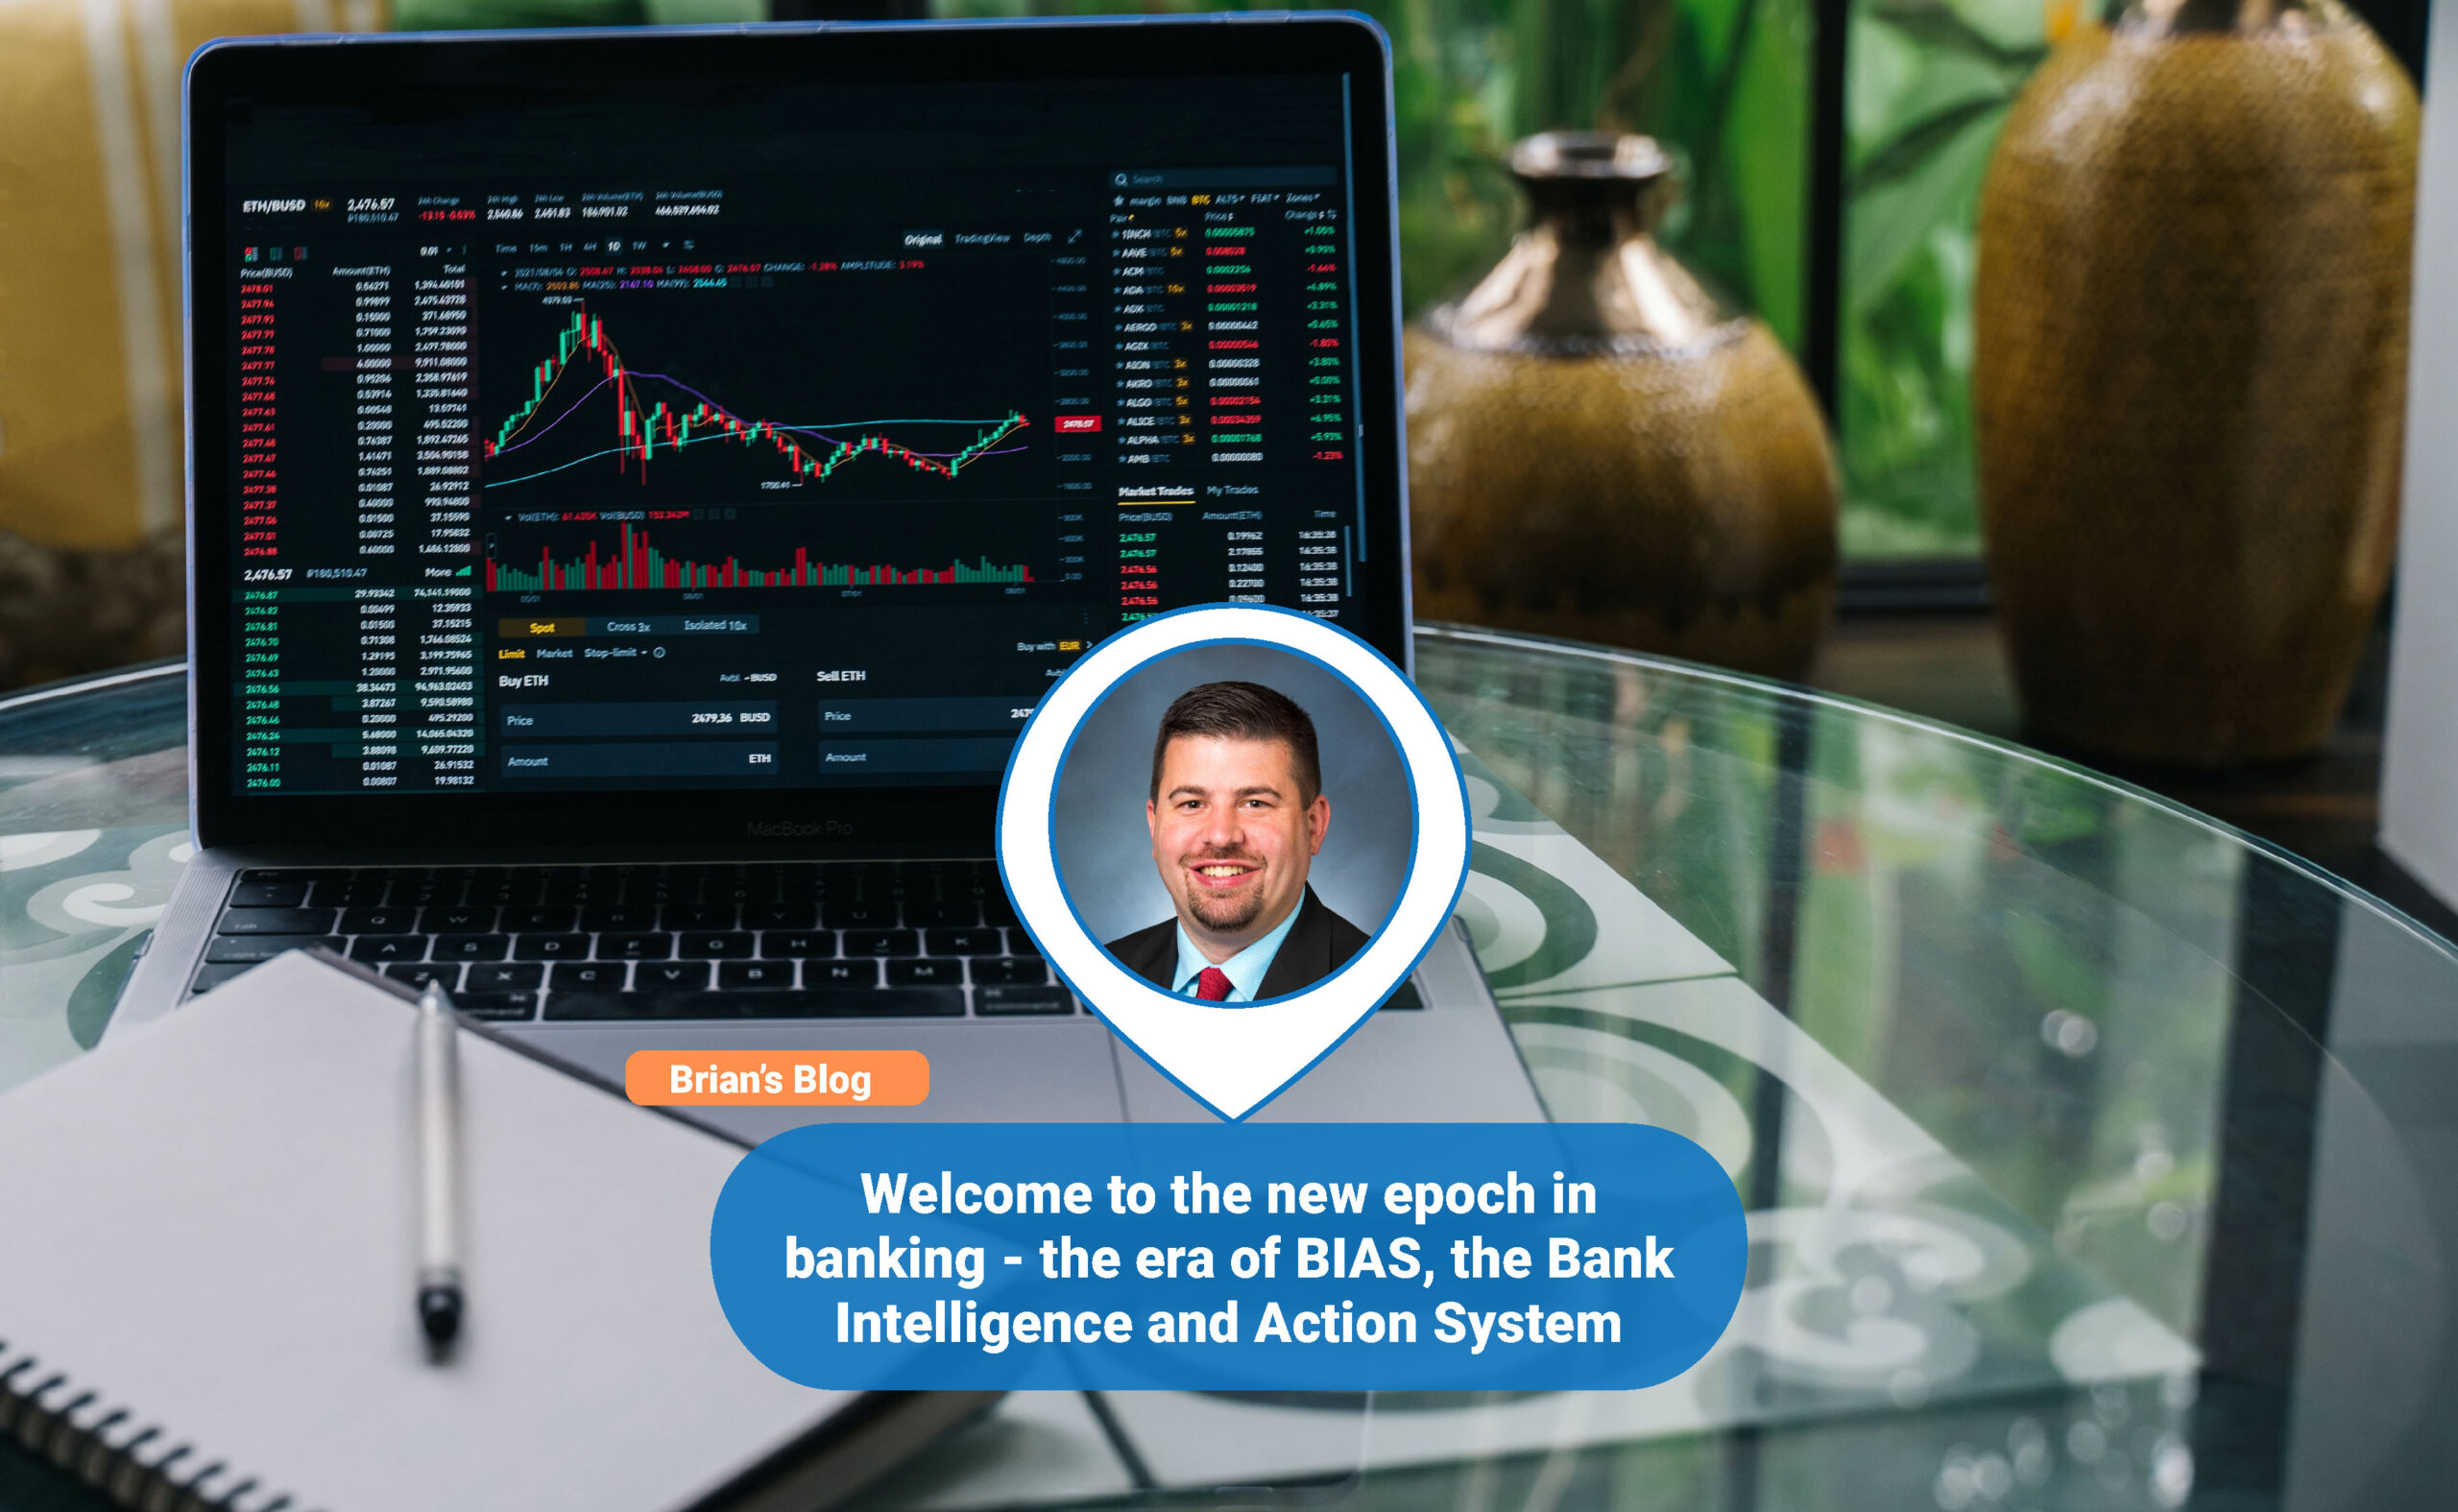 Welcome to the new epoch in banking – the era of BIAS, the Bank Intelligence and Action System